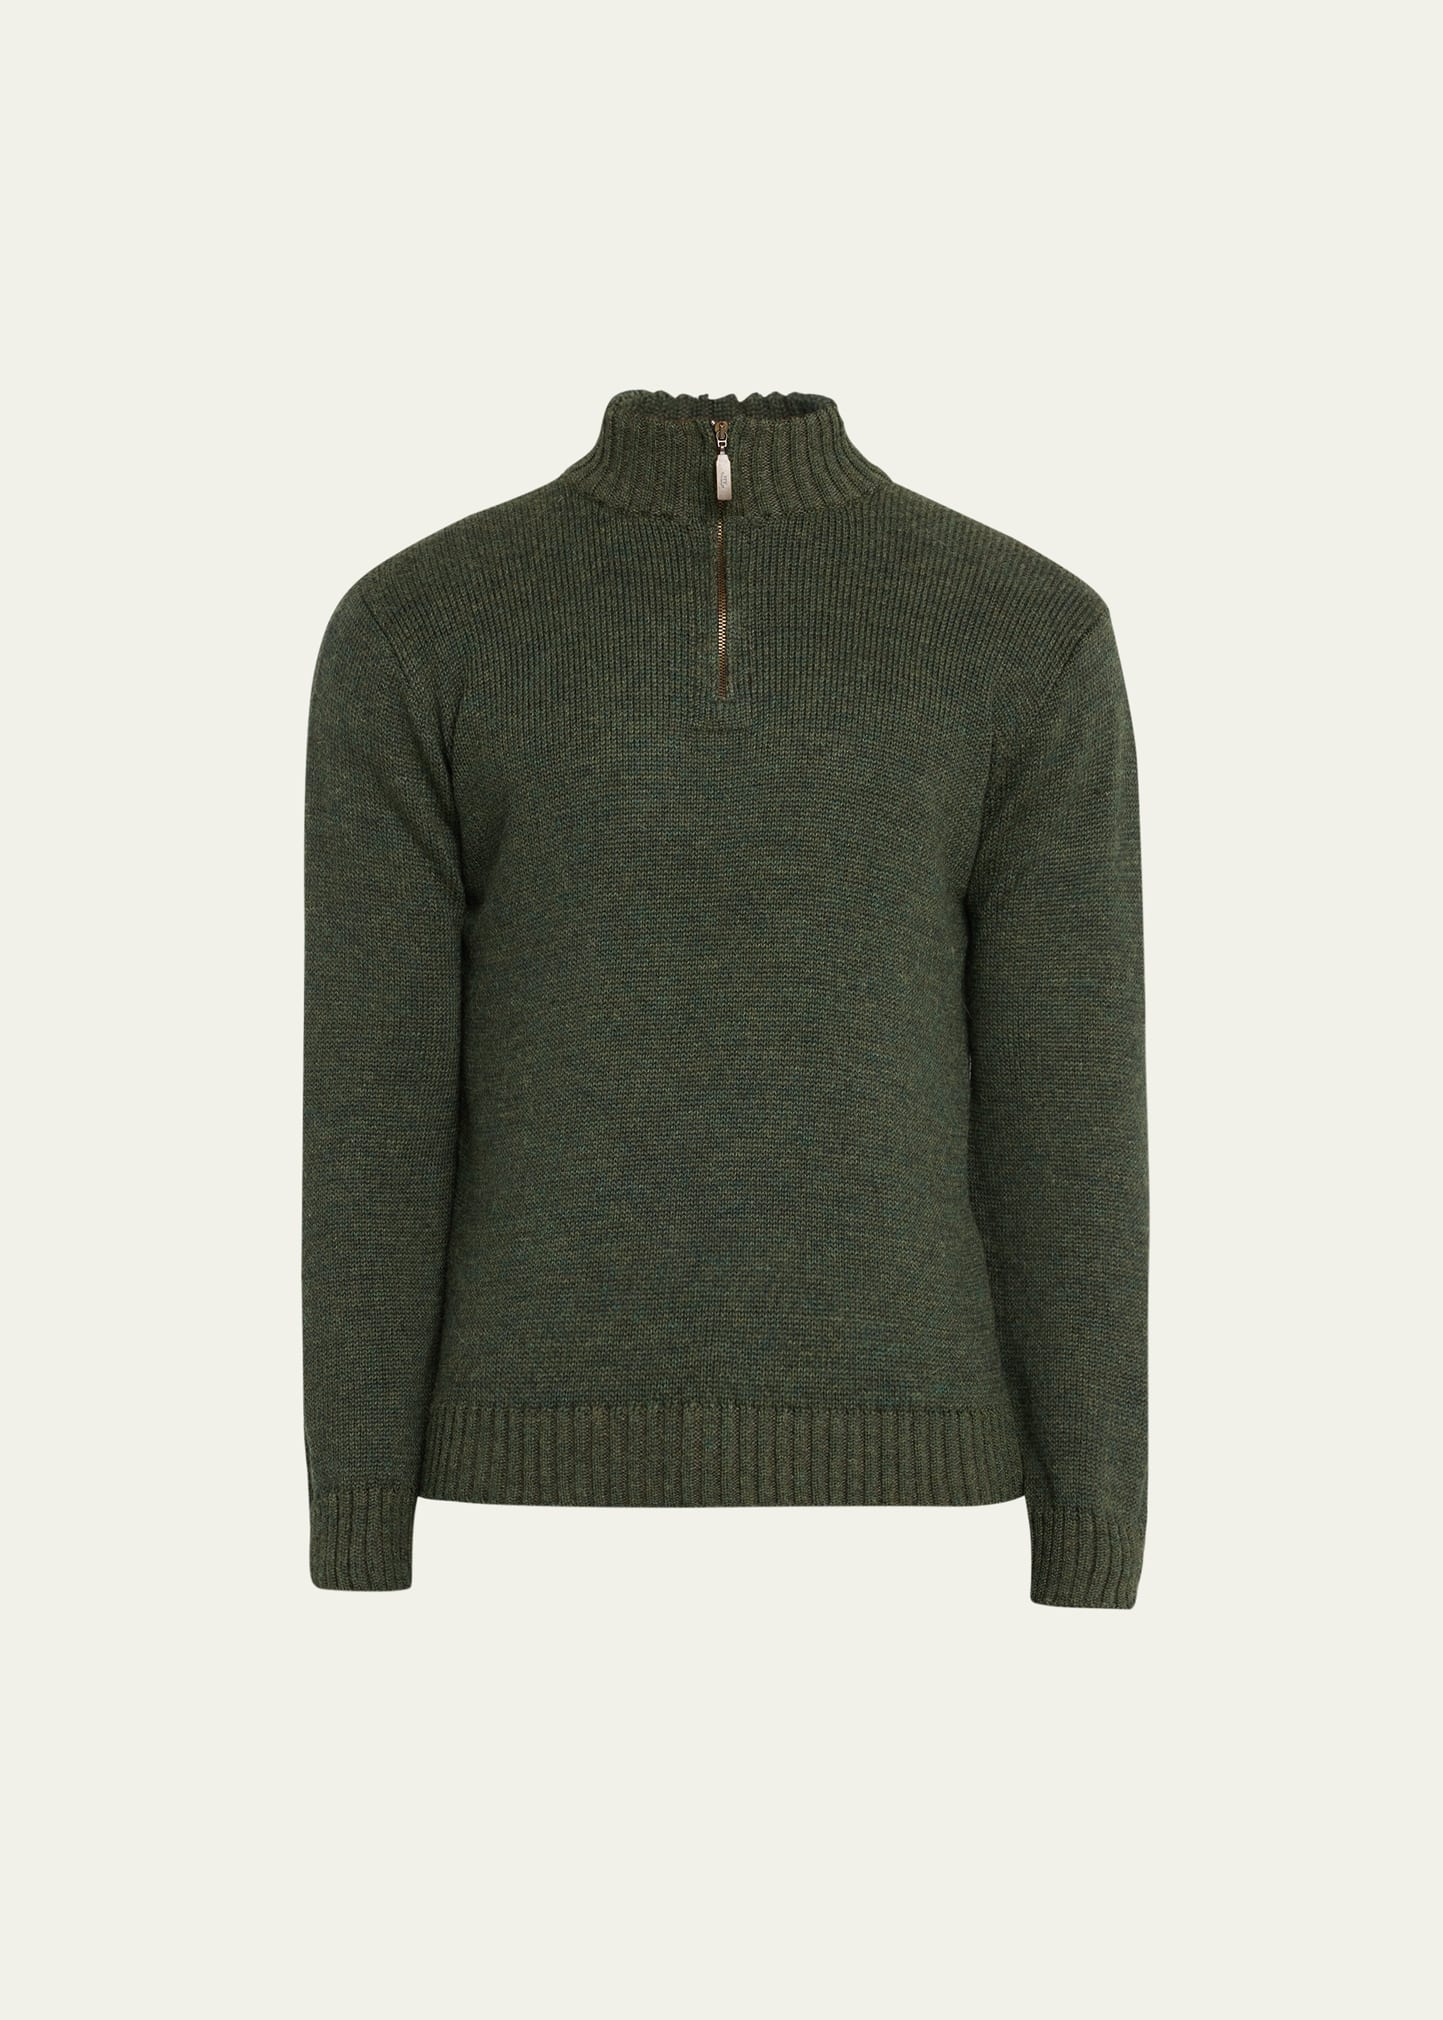 Inis Meain Men's Wool-alpaca Mock Neck Sweater In 116 Olive Mix